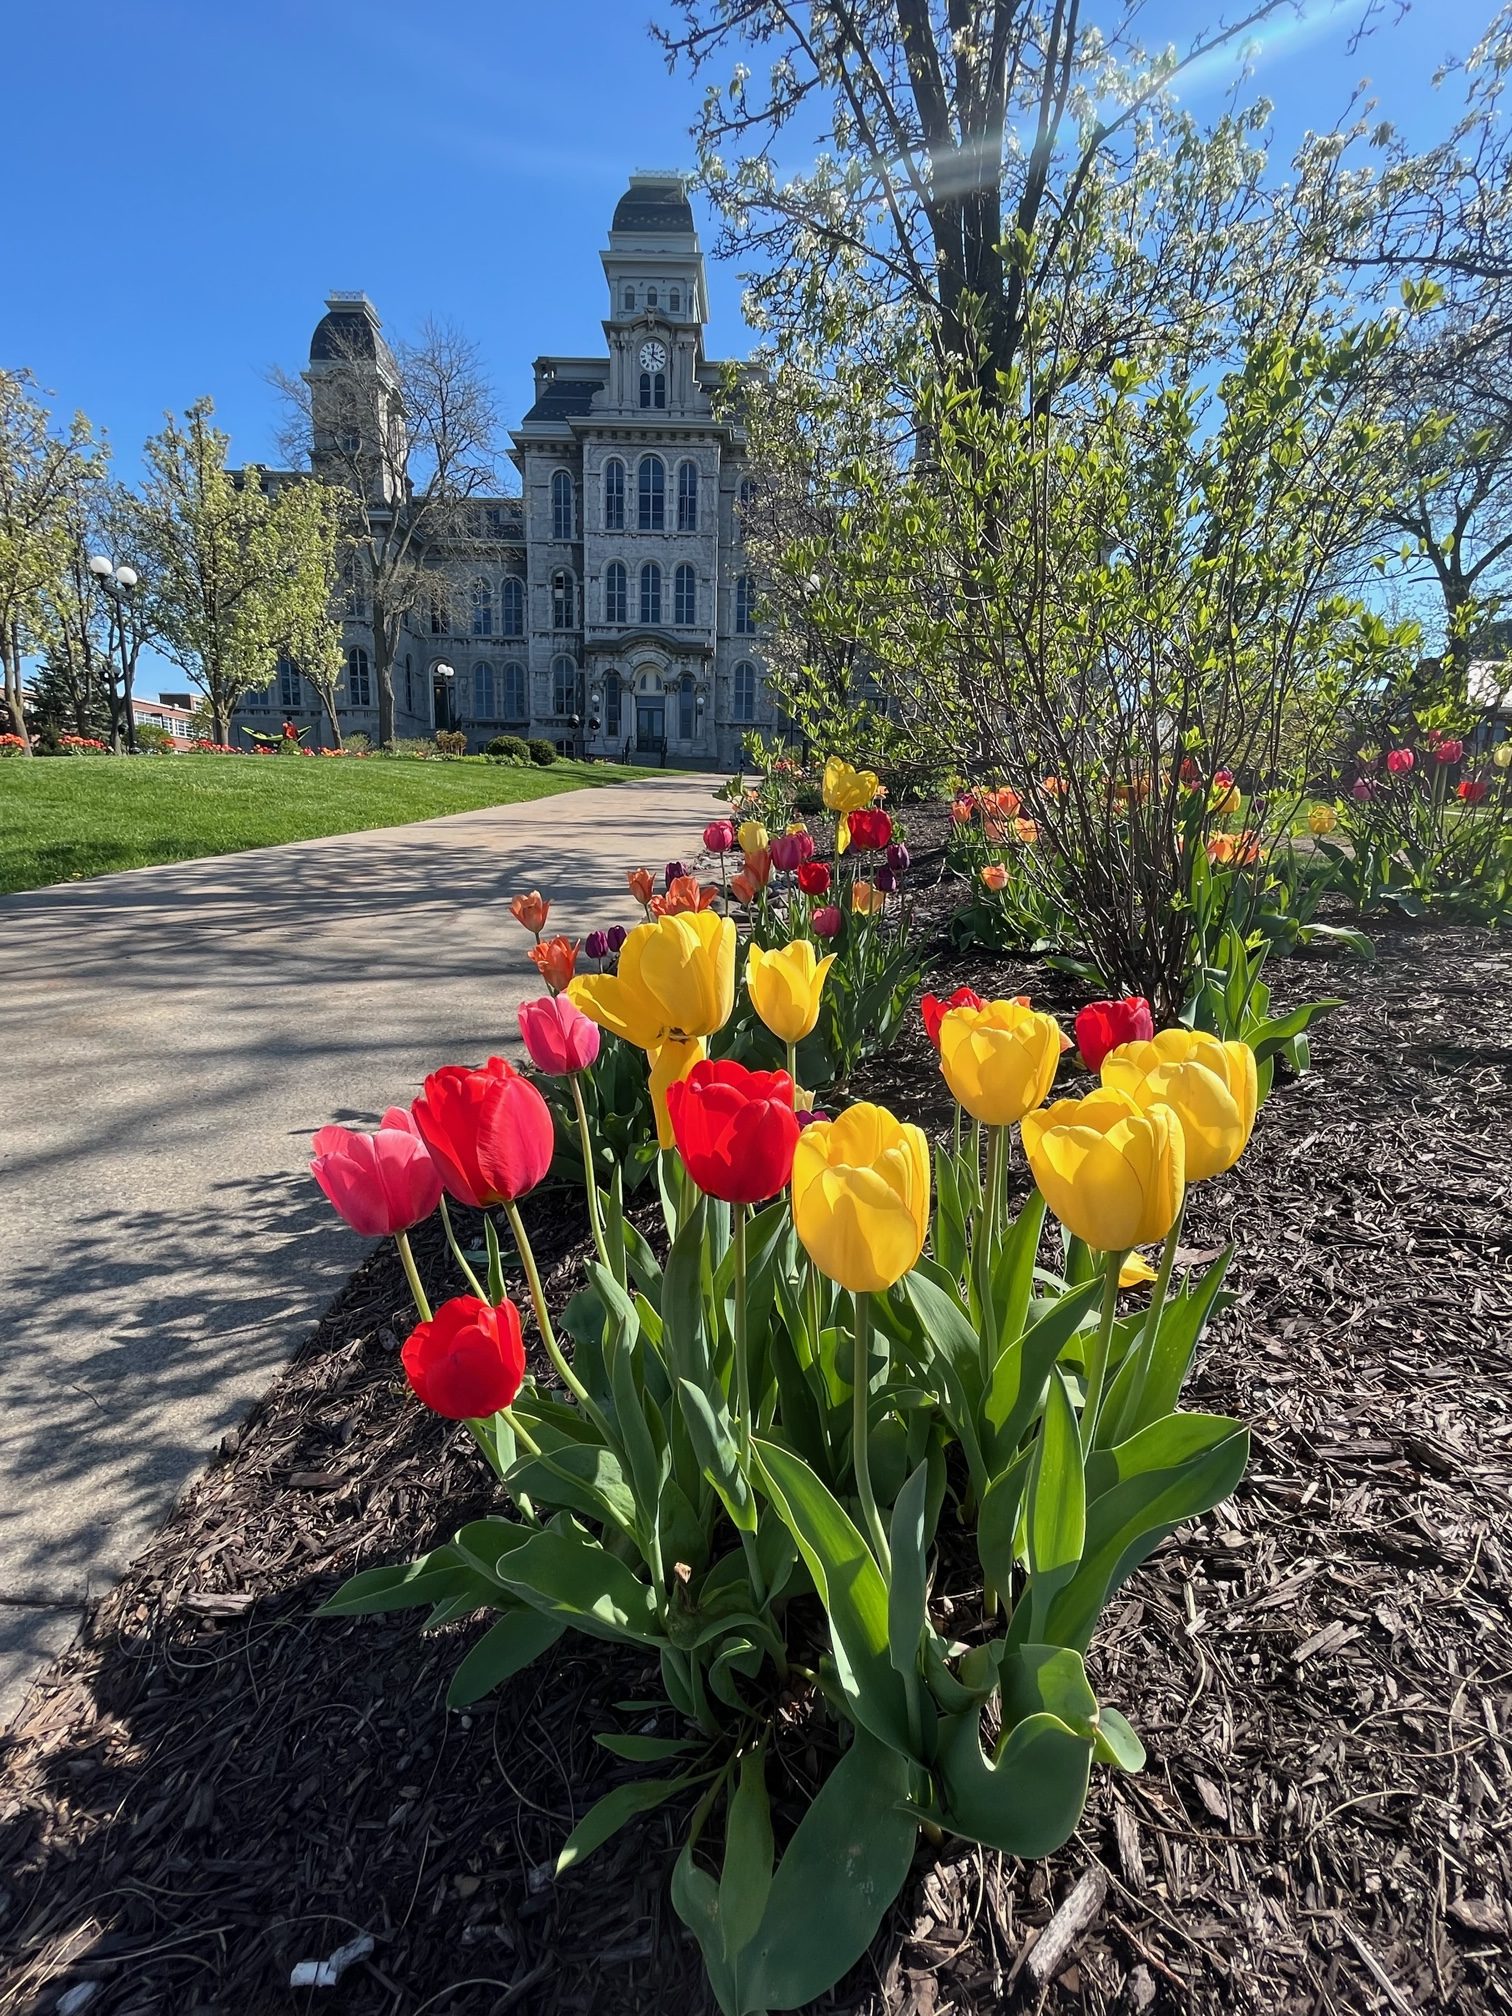 Beautiful multi-colored tulips with the Hall of Languages in the background.